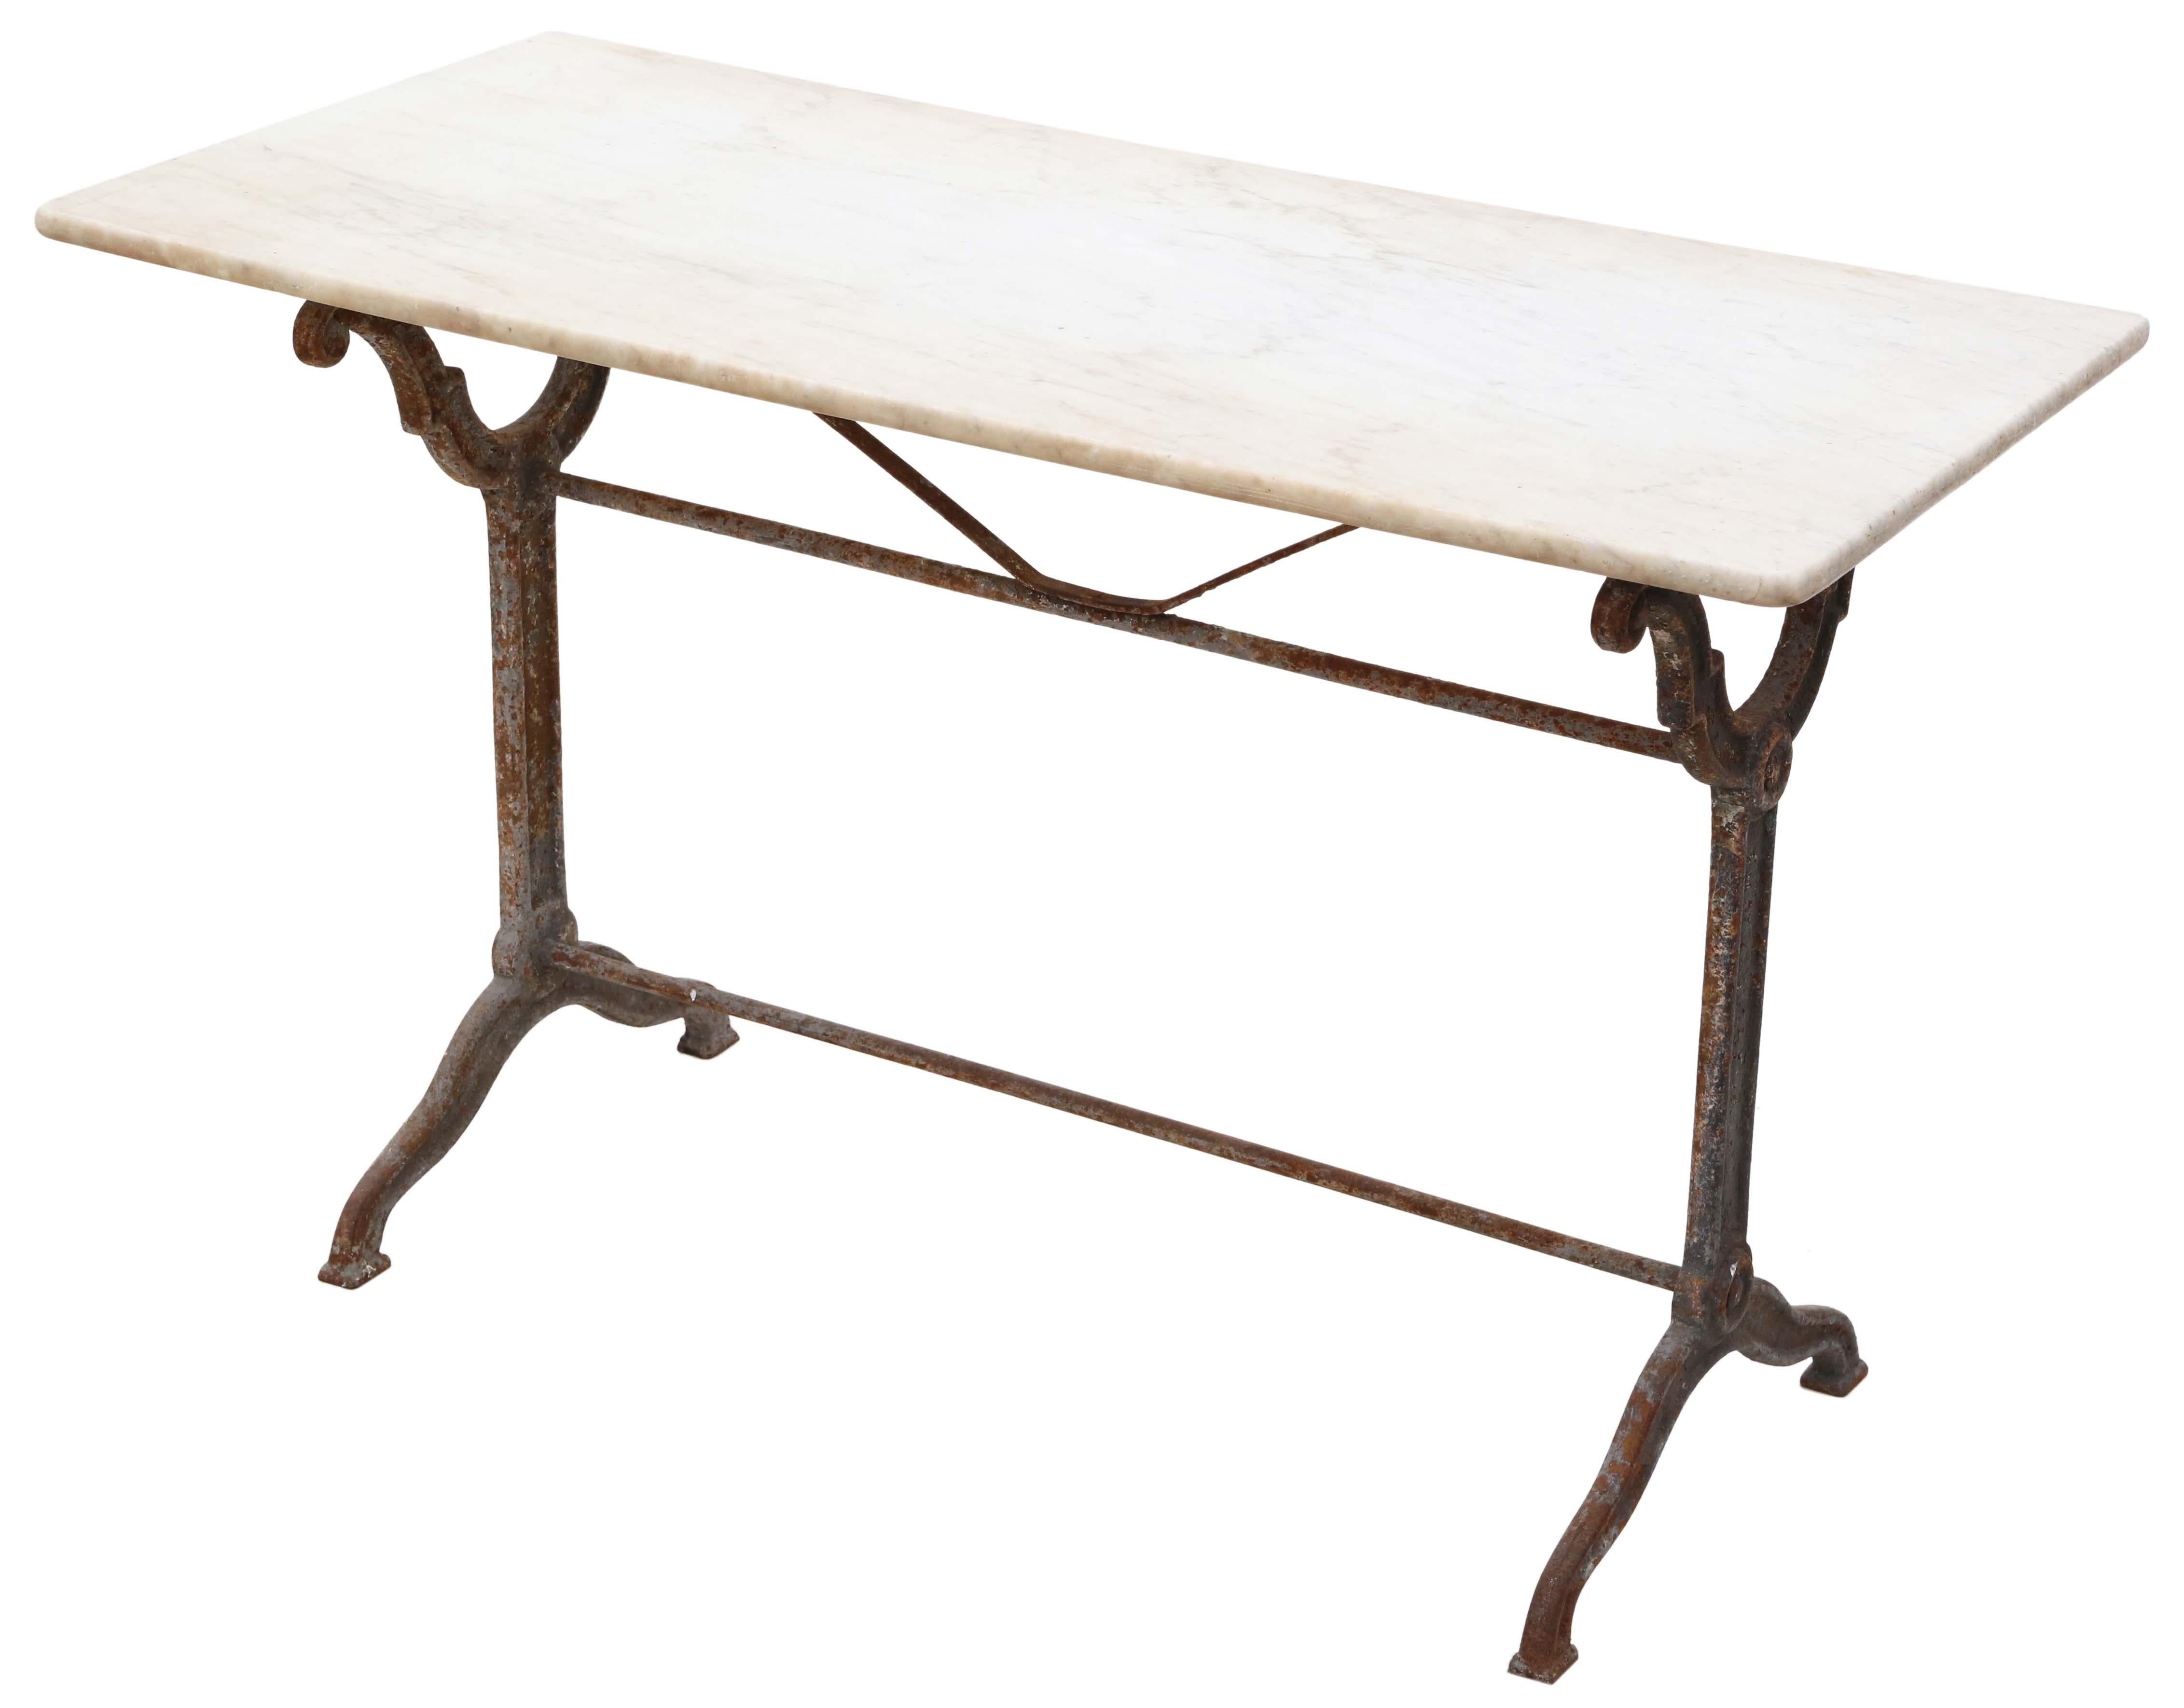 Antique 19th Century marble and cast iron patisserie bistro kitchen garden dining table .

Distressed grey paint to base and a patinated/worn unfixed marble top with no cracks or repairs.

Solid, heavy and strong, with no loose joints or